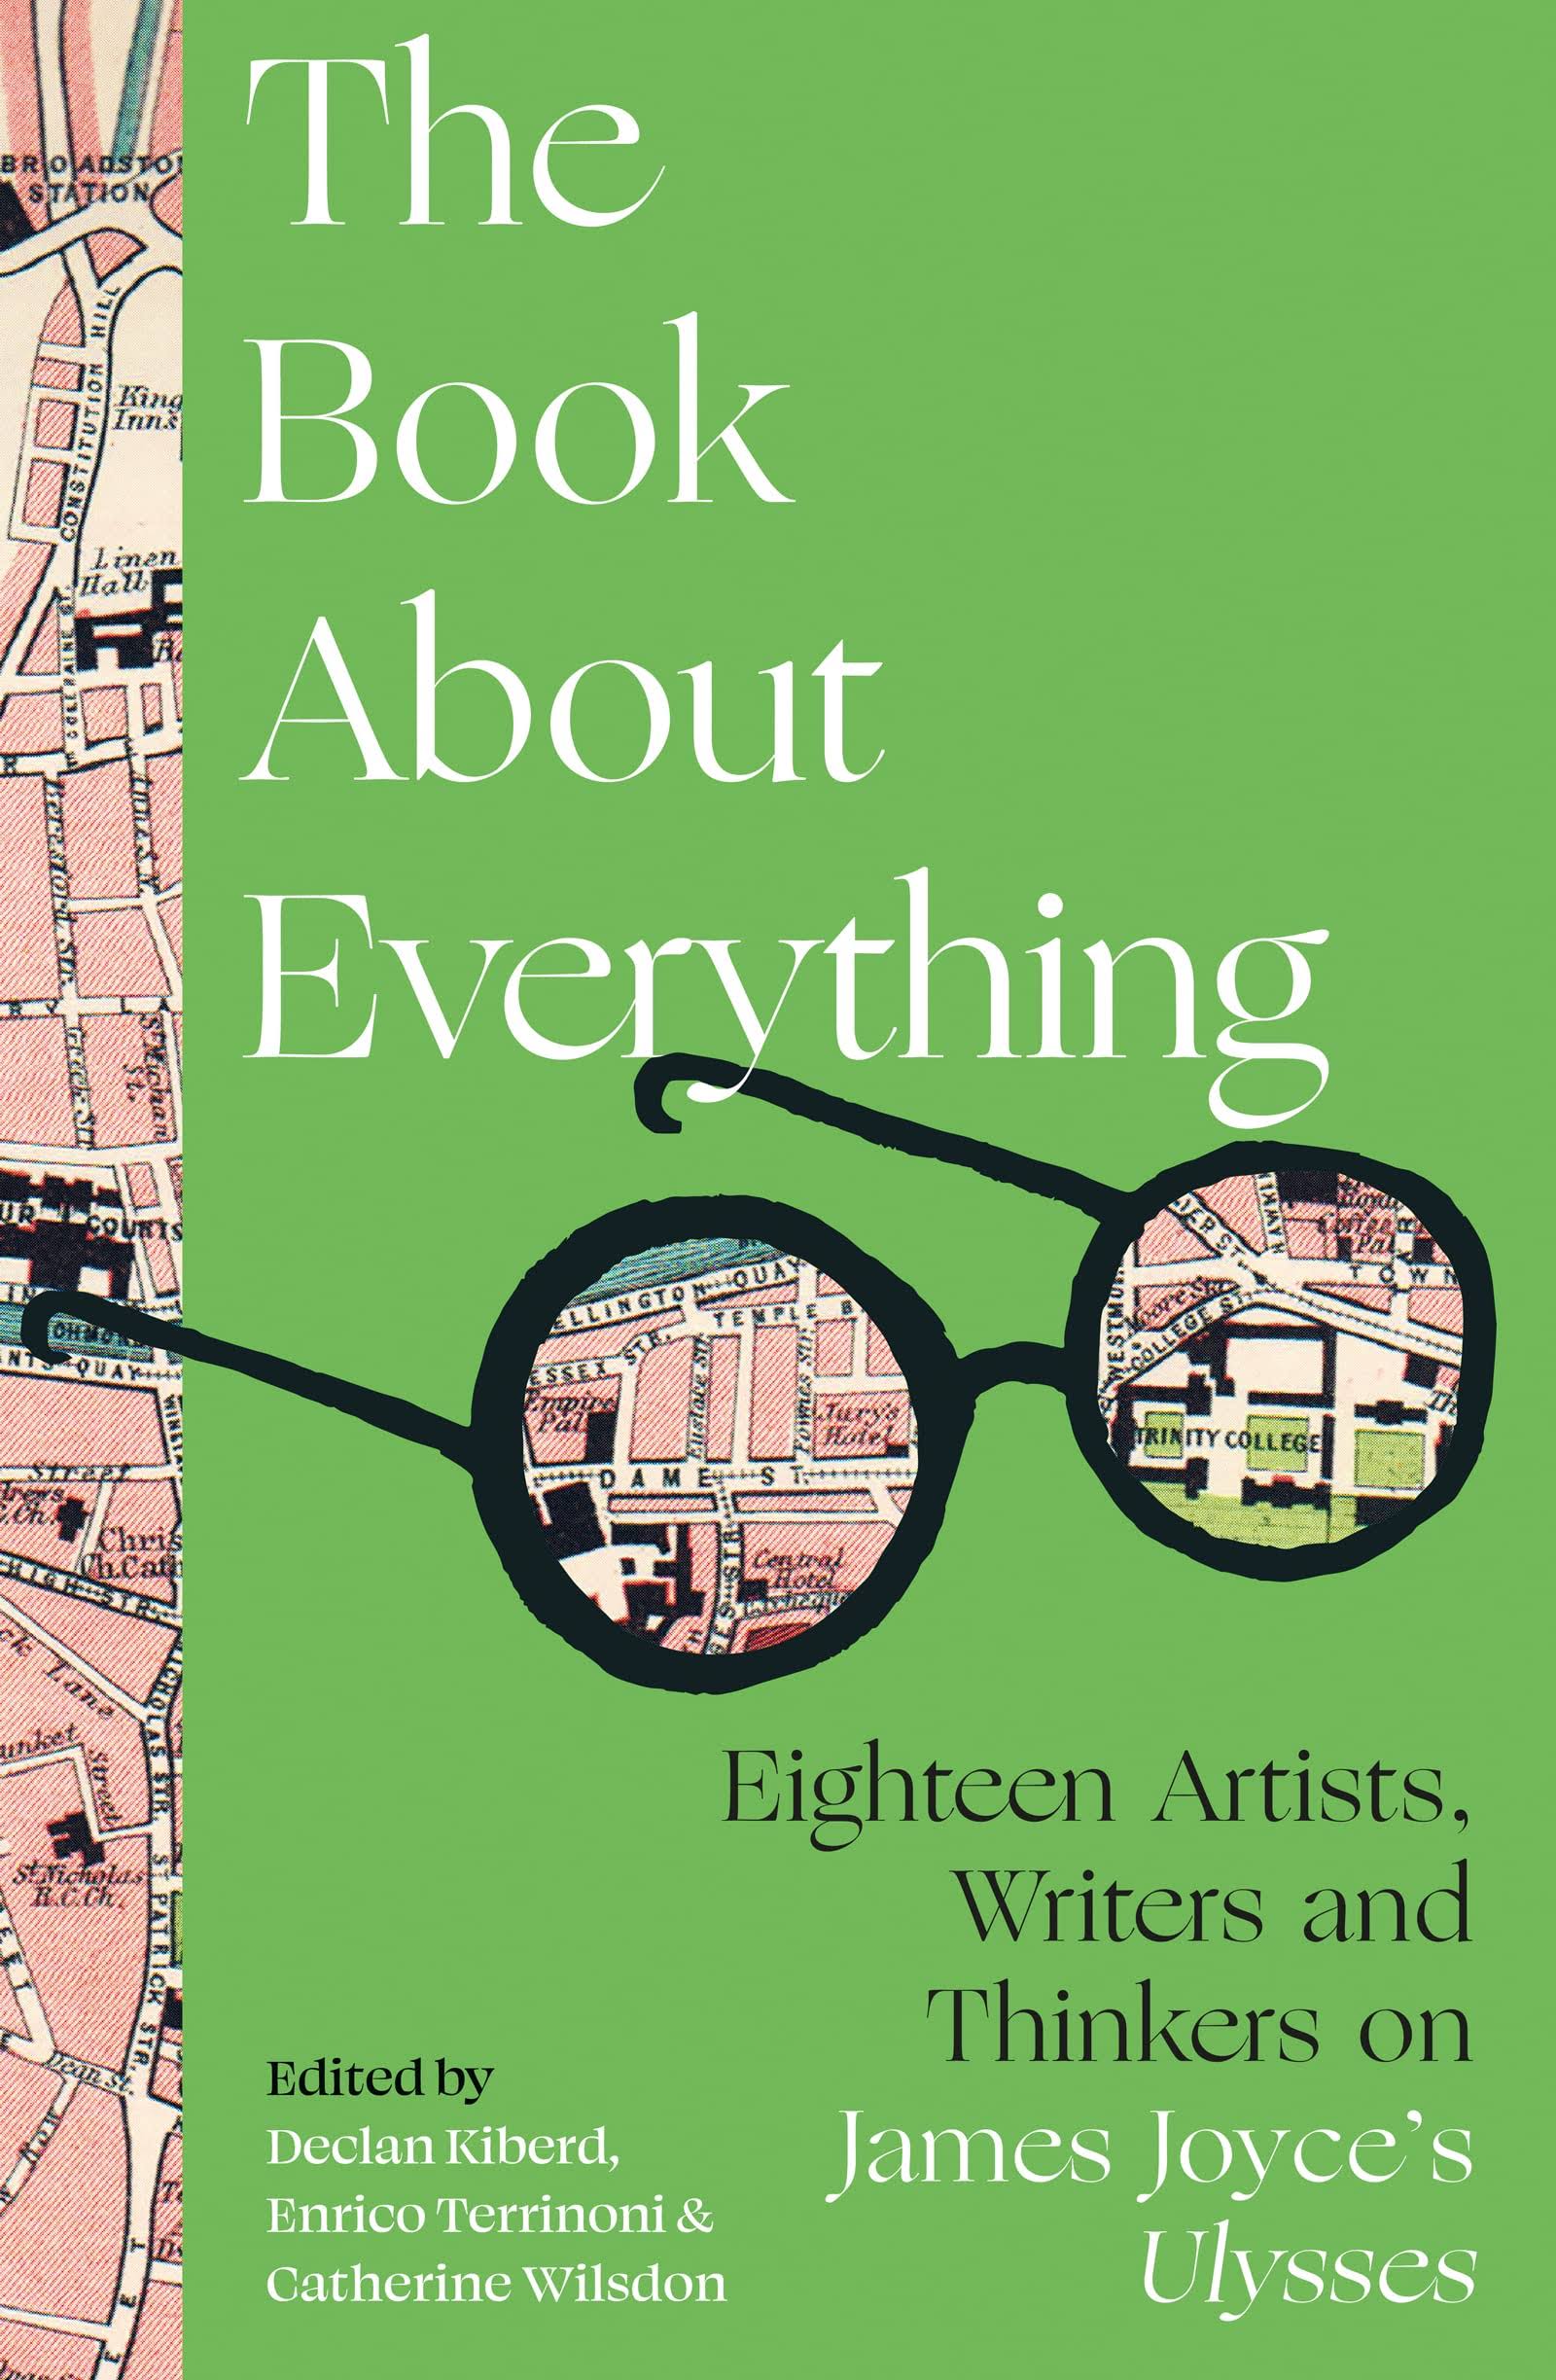 The Book about Everything: Eighteen Artists, Writers and Thinkers on James Joyce's Ulysses [Book]